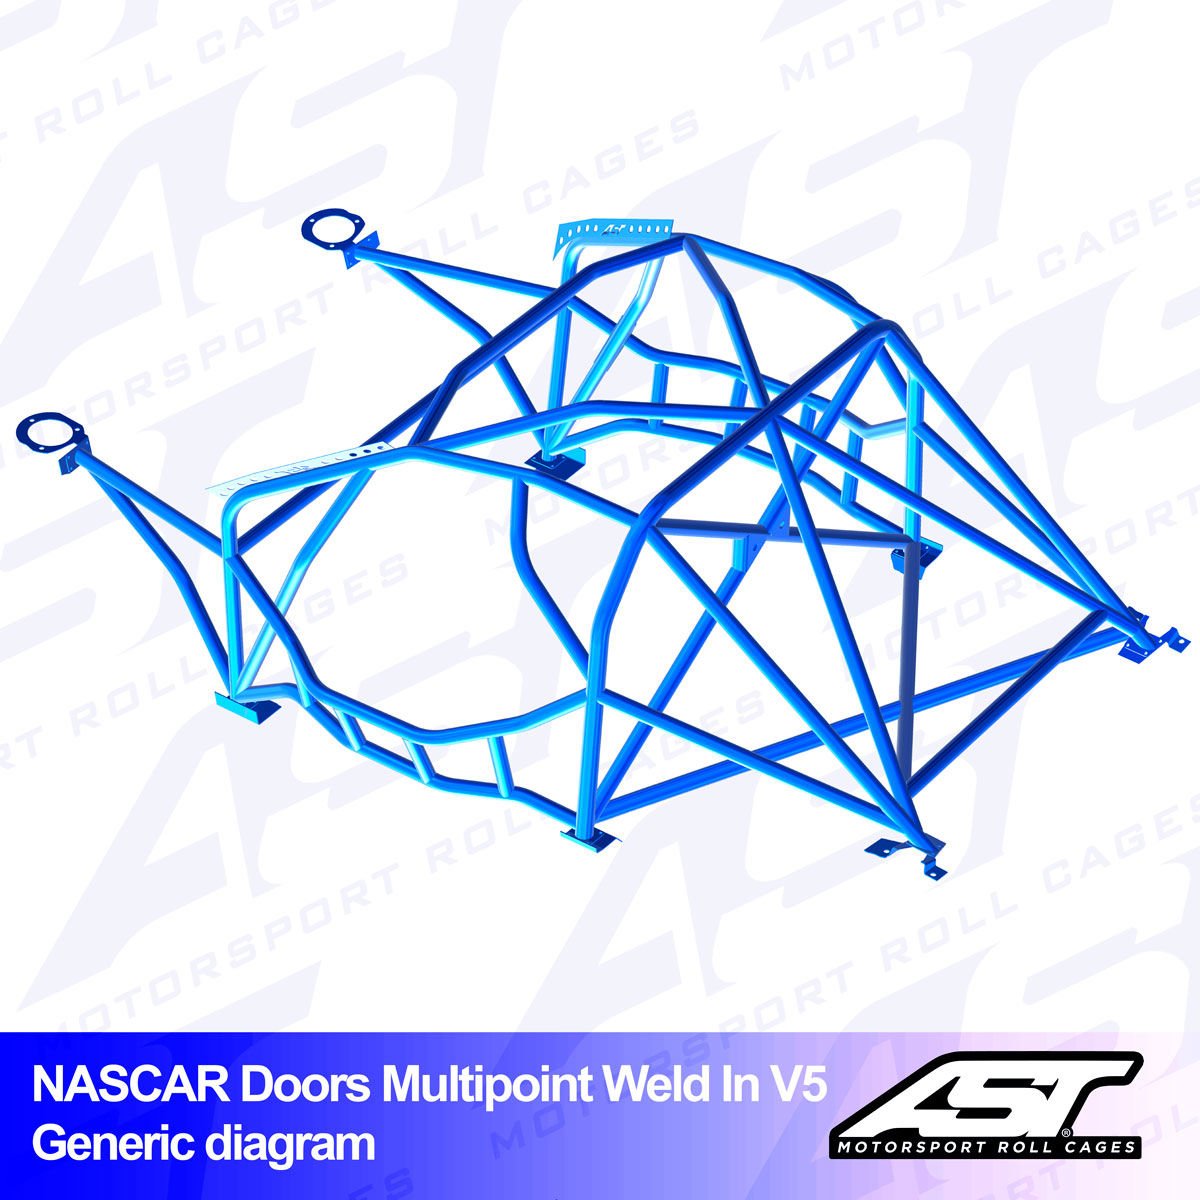 Roll Cage BMW (E34) 5-Series 5-doors Touring RWD MULTIPOINT WELD IN V5 NASCAR-door for drift